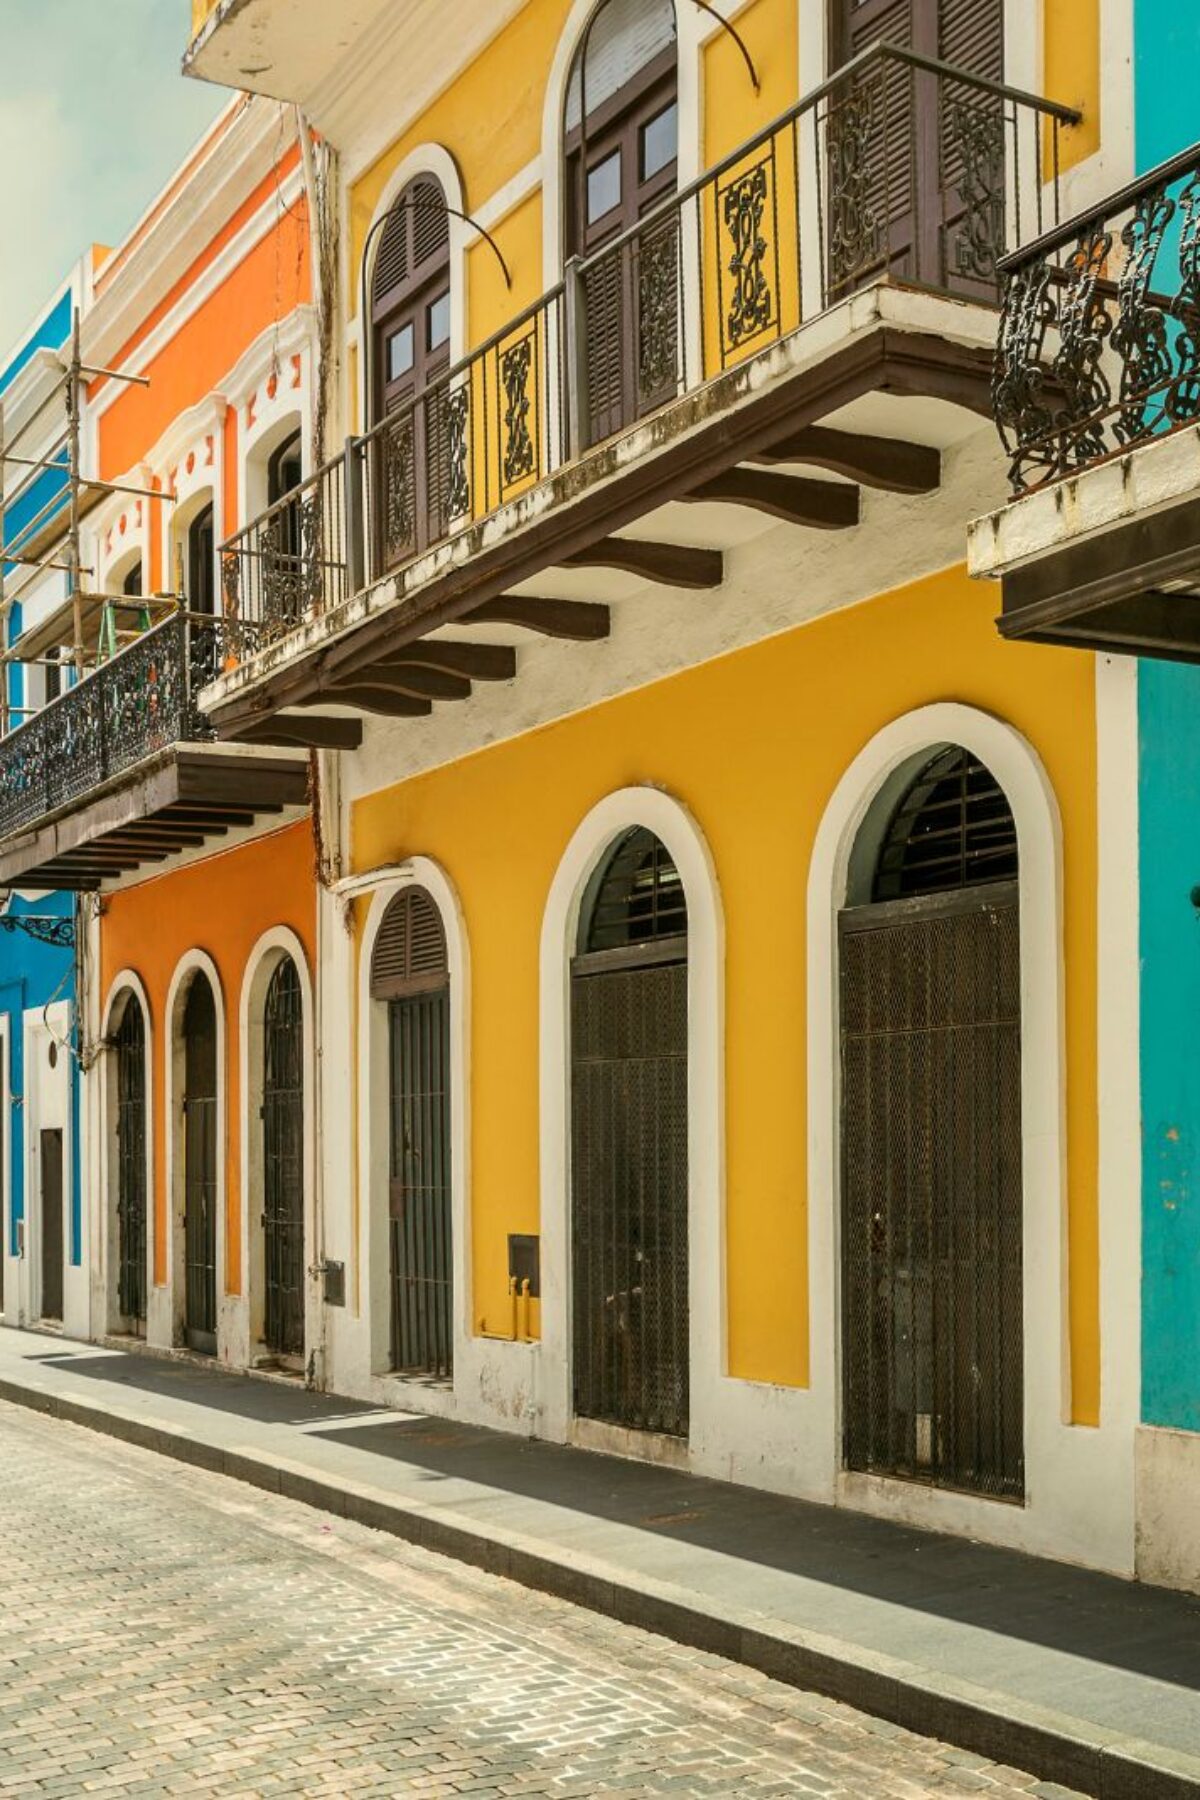 Colorful houses in old San Juan, Puerto Rico